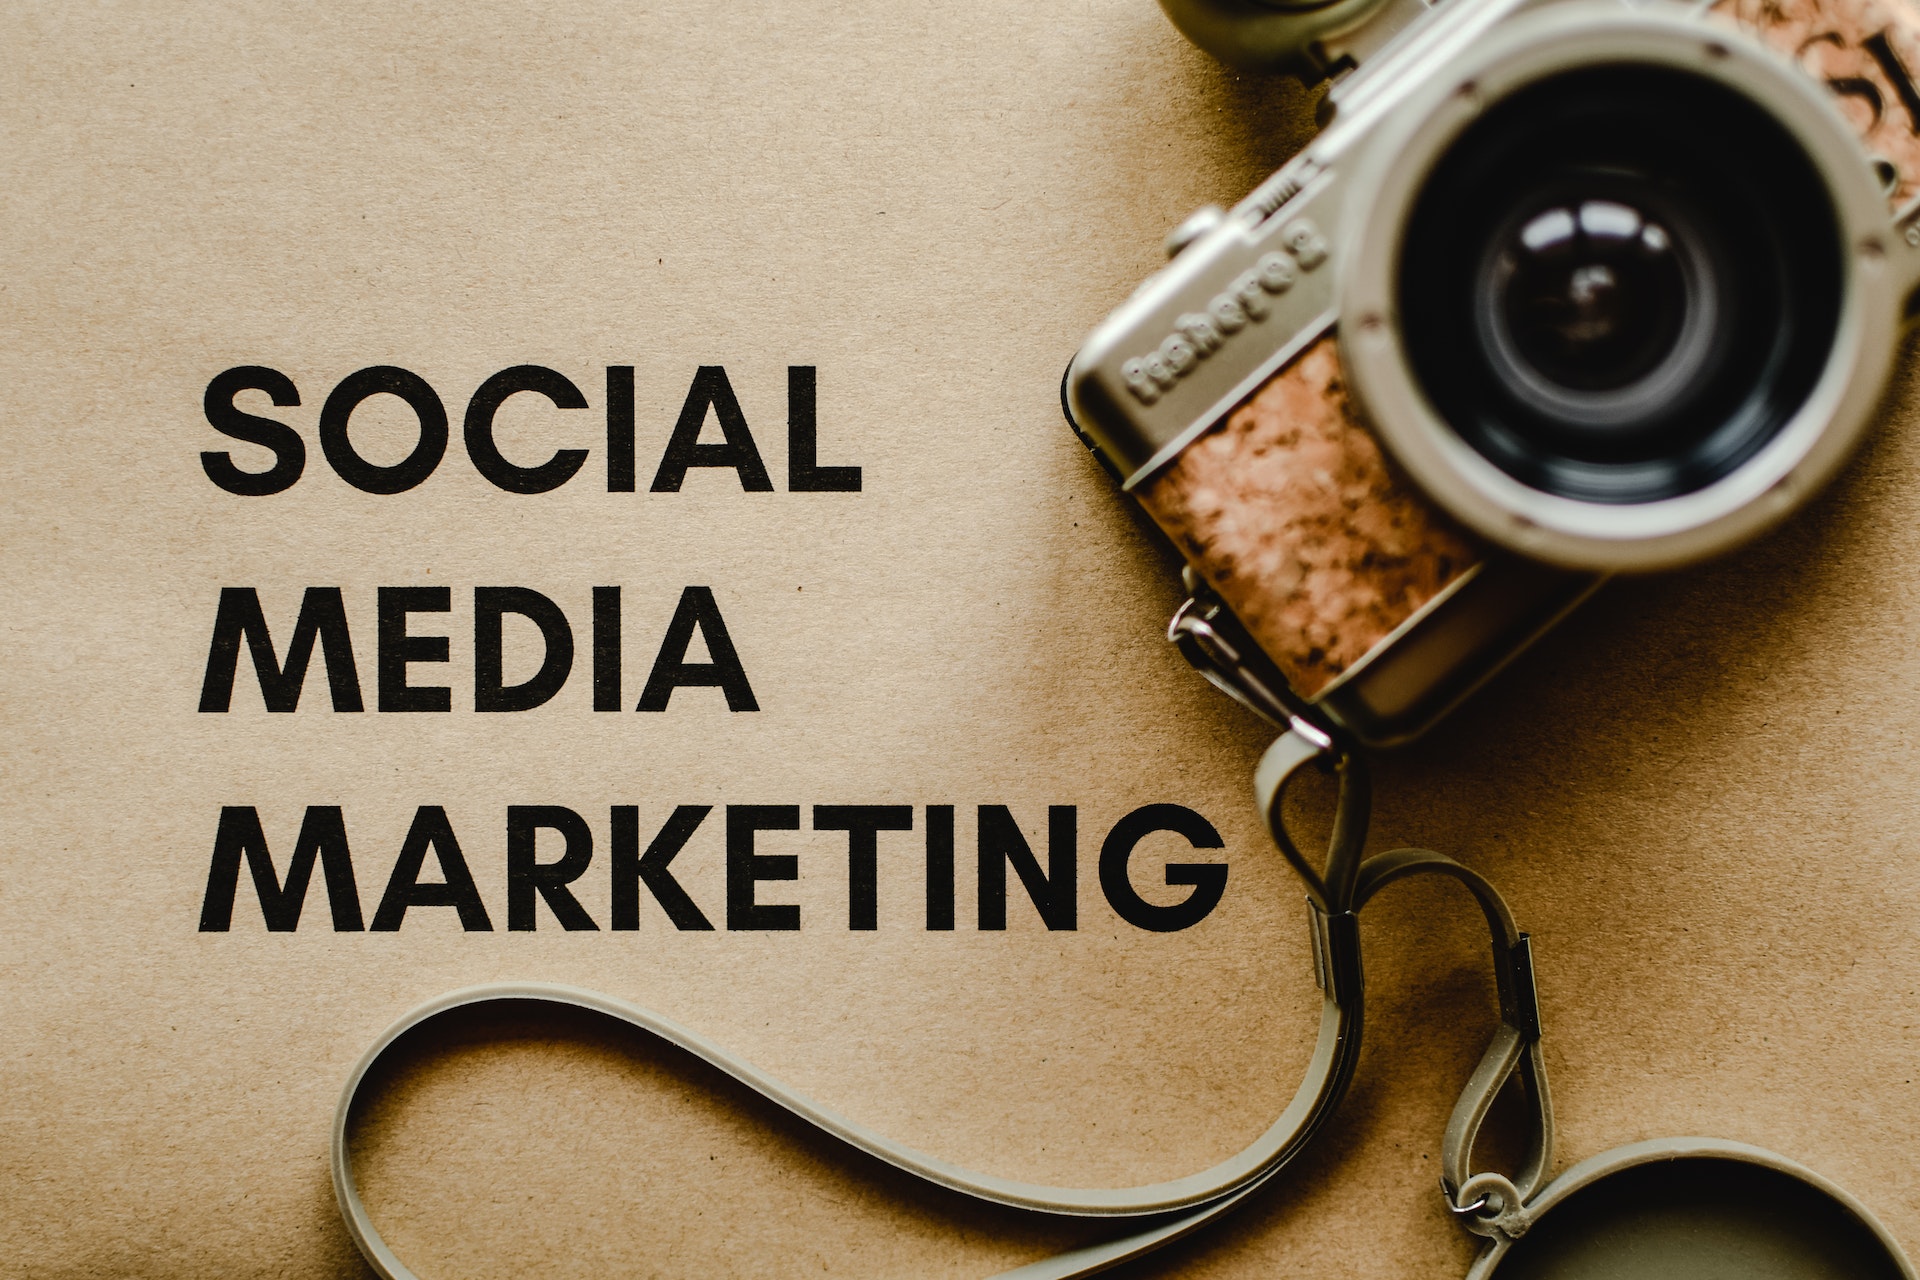 Didital camera next to the words "social media marketing" printed on brown paper